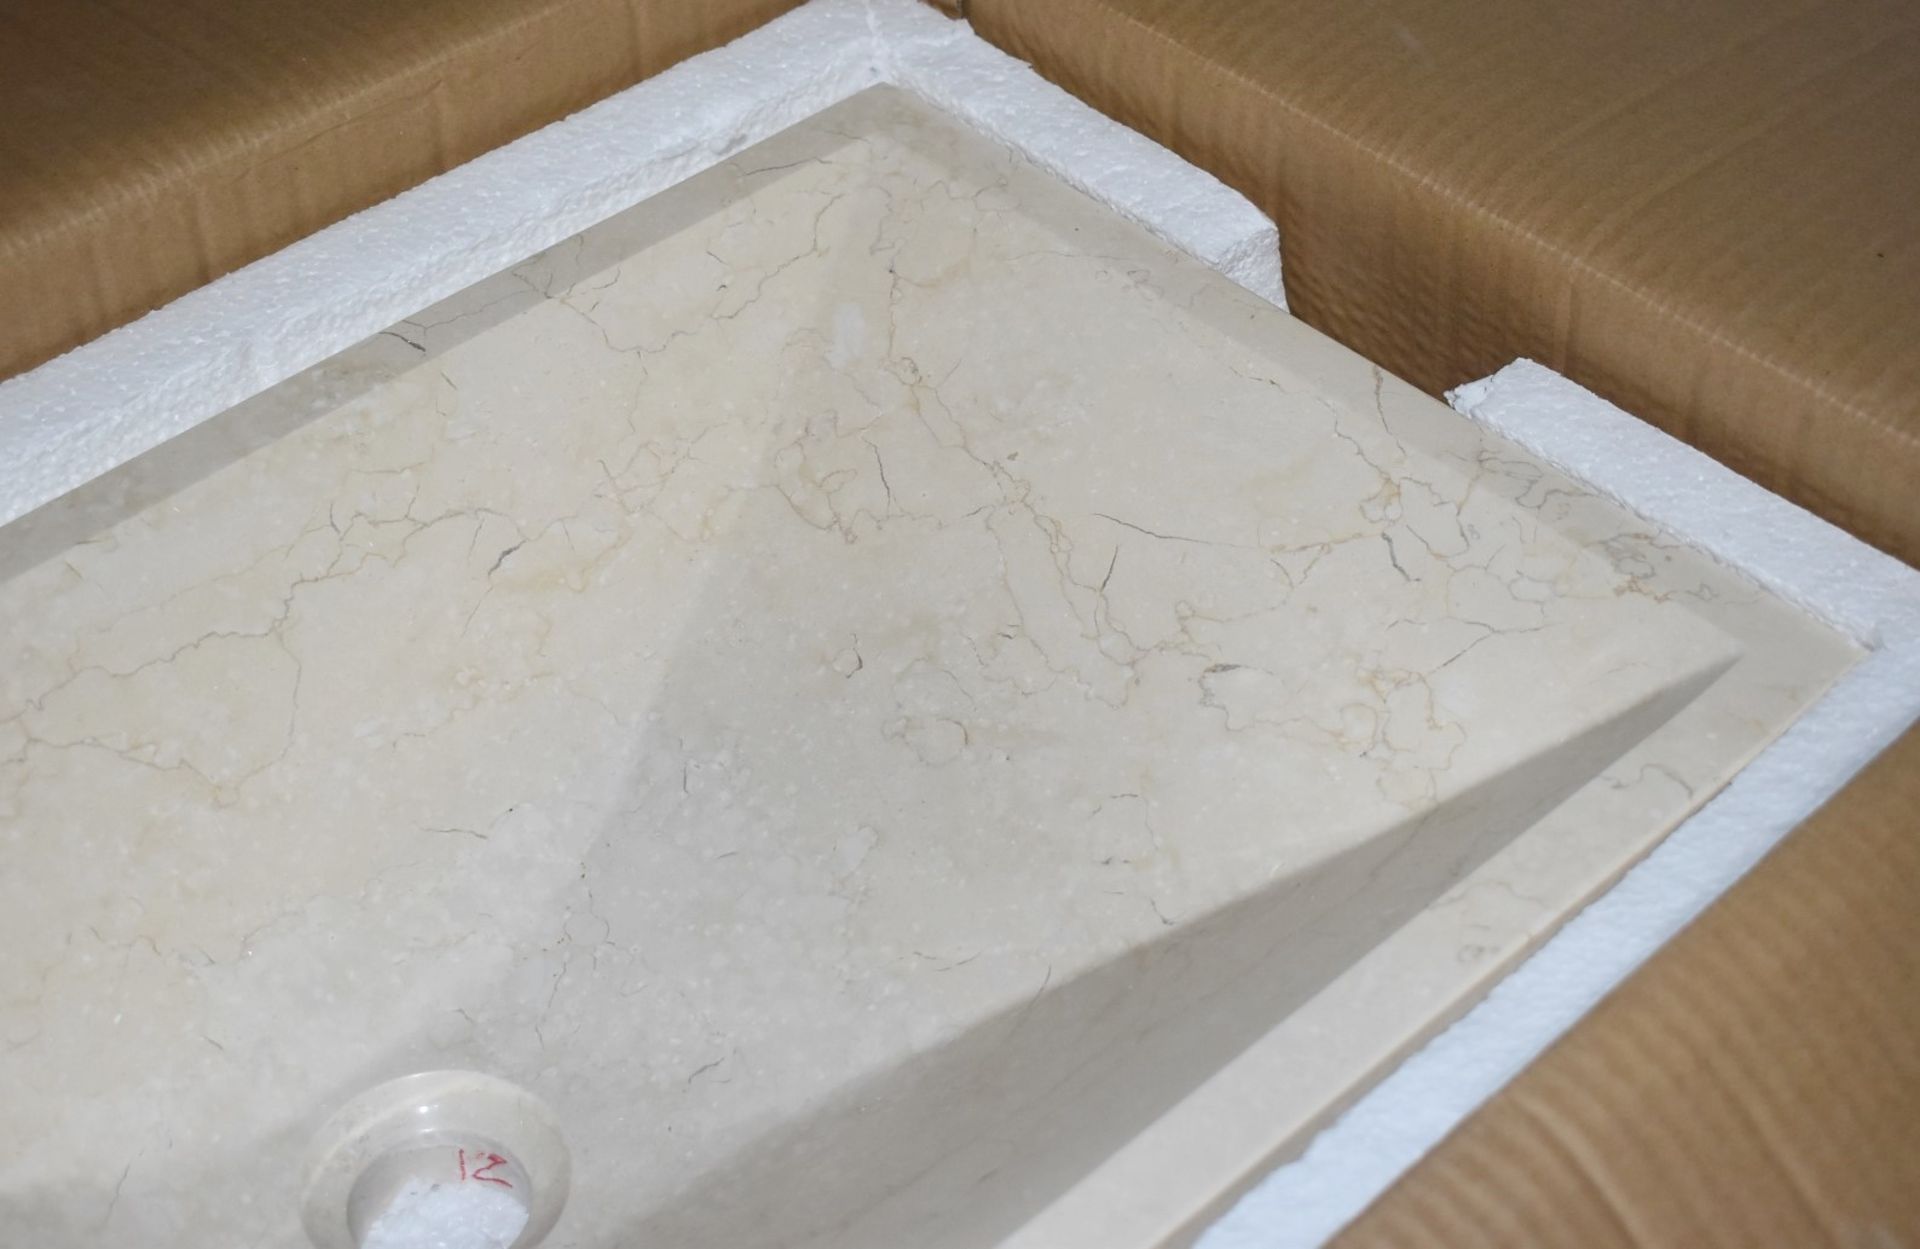 1 x Stonearth 'Karo' Solid Travertine Stone Countertop Sink Basin - New Boxed Stock - RRP £525 - - Image 6 of 8